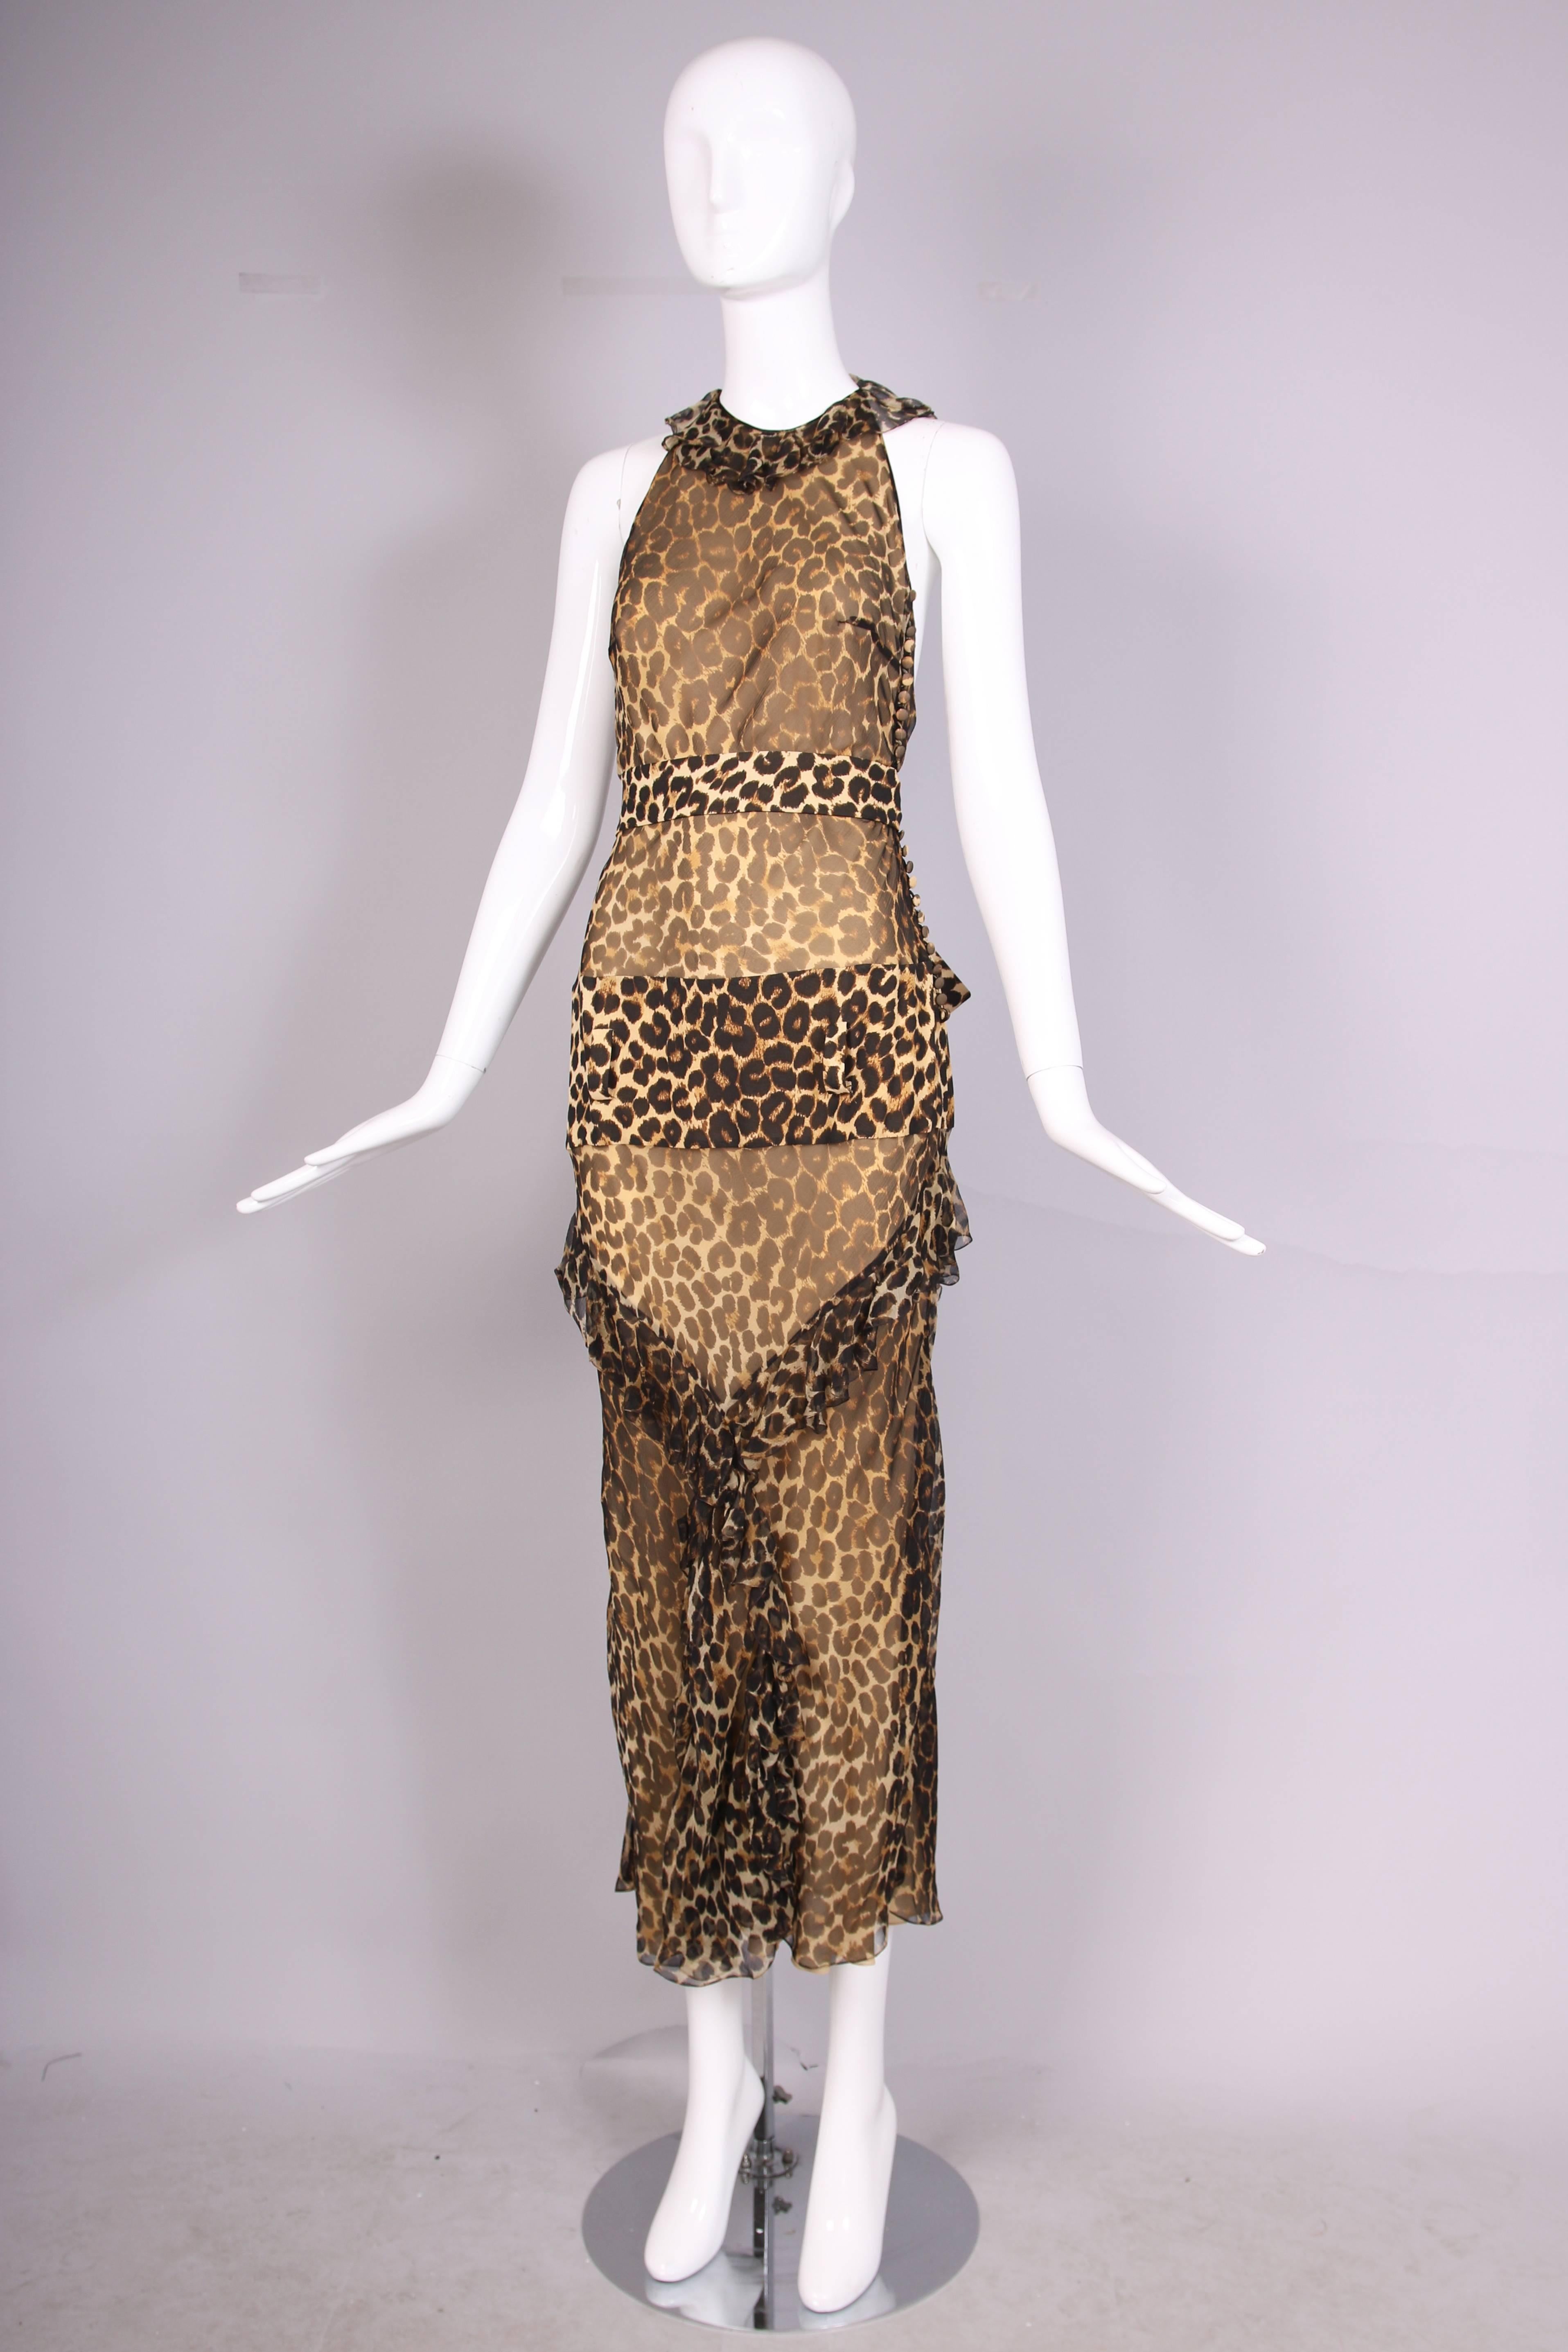 1990's John Galliano sheer silk chiffon leopard print halter dress with dropped waist and matching belt. Gown features ruffled neck ties and ruffle trim design at front of skirt. Button closure at bodice side. In excellent condition. Size US